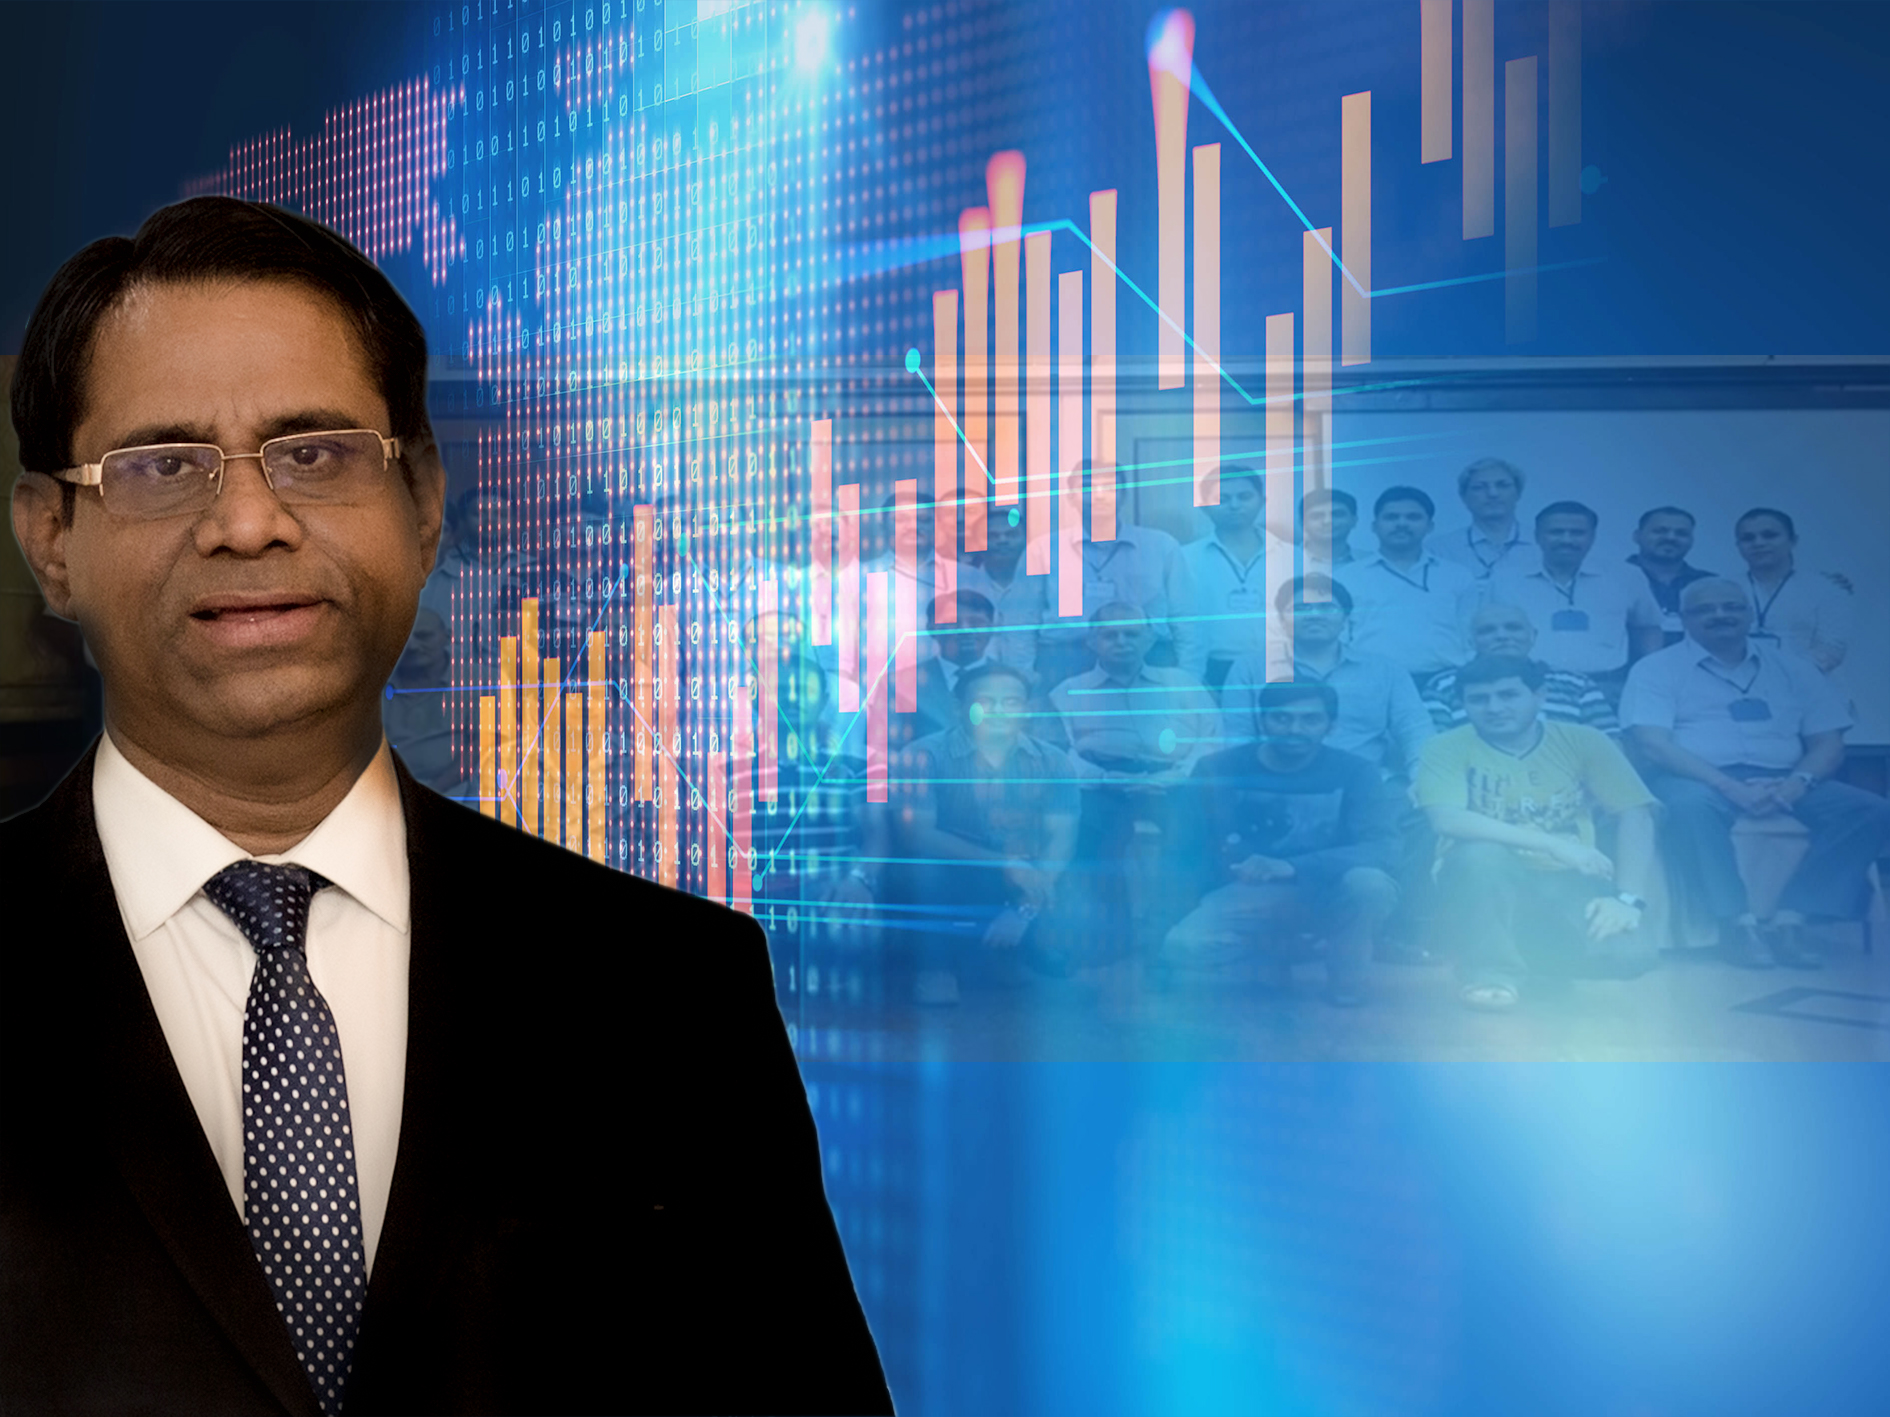 Daily 8.30-9.00 Live Trade Of The Day & Market View Session for 12 Months by Rtn Yogeshwar Vashishtha (M.Tech.IIT)